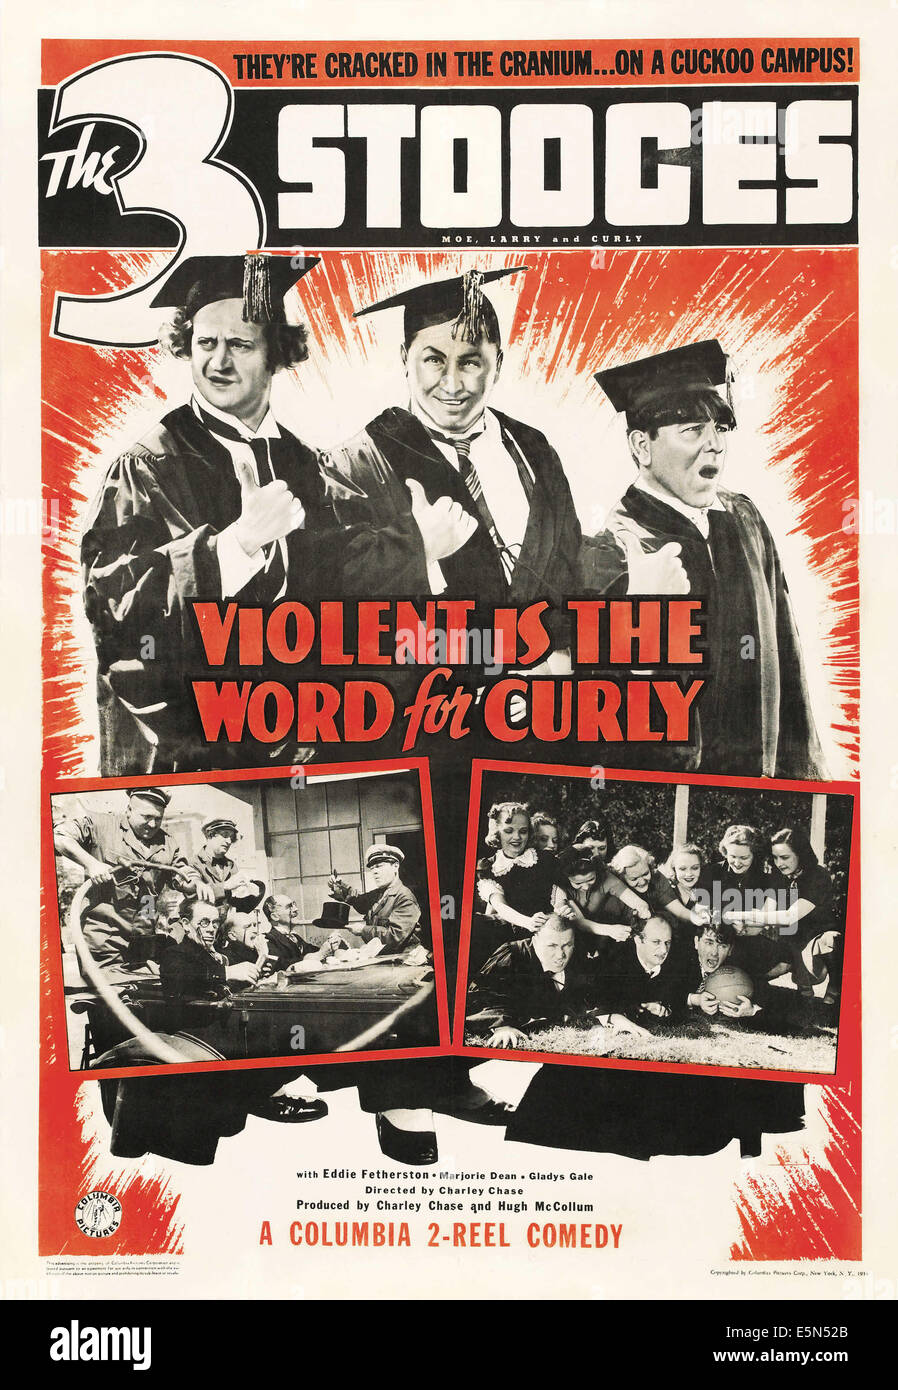 VIOLENT IS THE WORD FOR CURLY, The Three Stooges, Larry Fine, Curly Howard, Moe Howard, poster art, 1938. Stock Photo